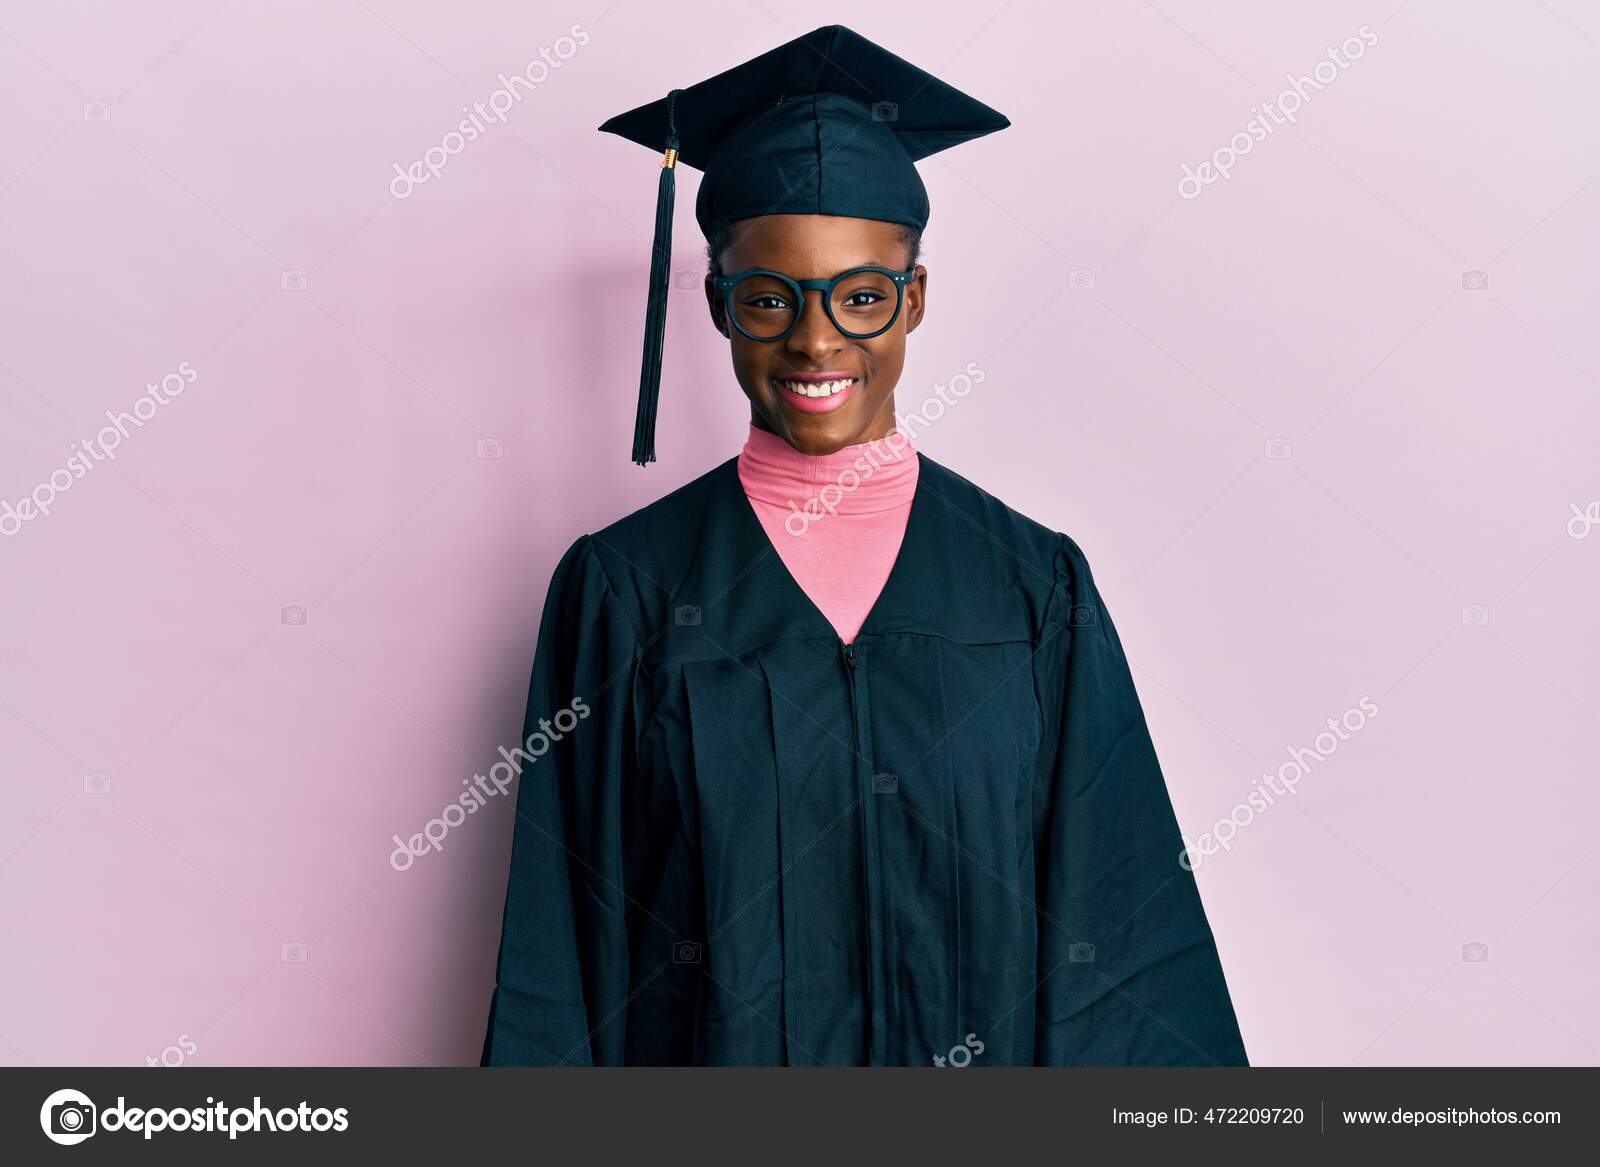 Man In Black Graduation Gown With Cap Illustration Royalty Free SVG,  Cliparts, Vectors, and Stock Illustration. Image 66305785.